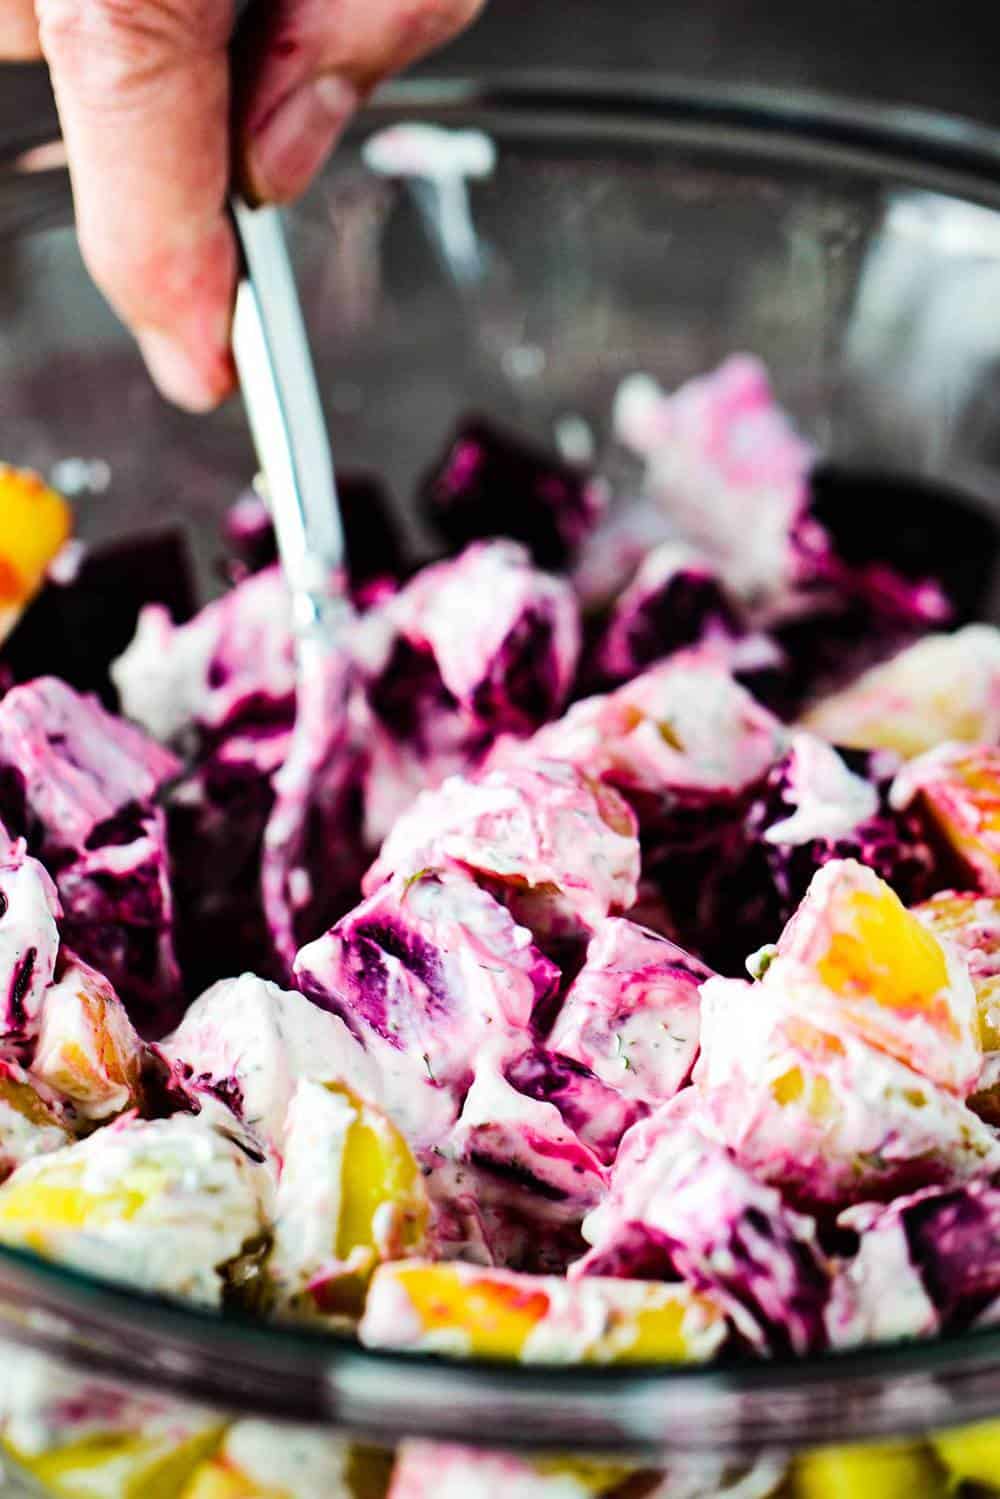 A spoon stirring together roasted beet and potato salad with dill dressing